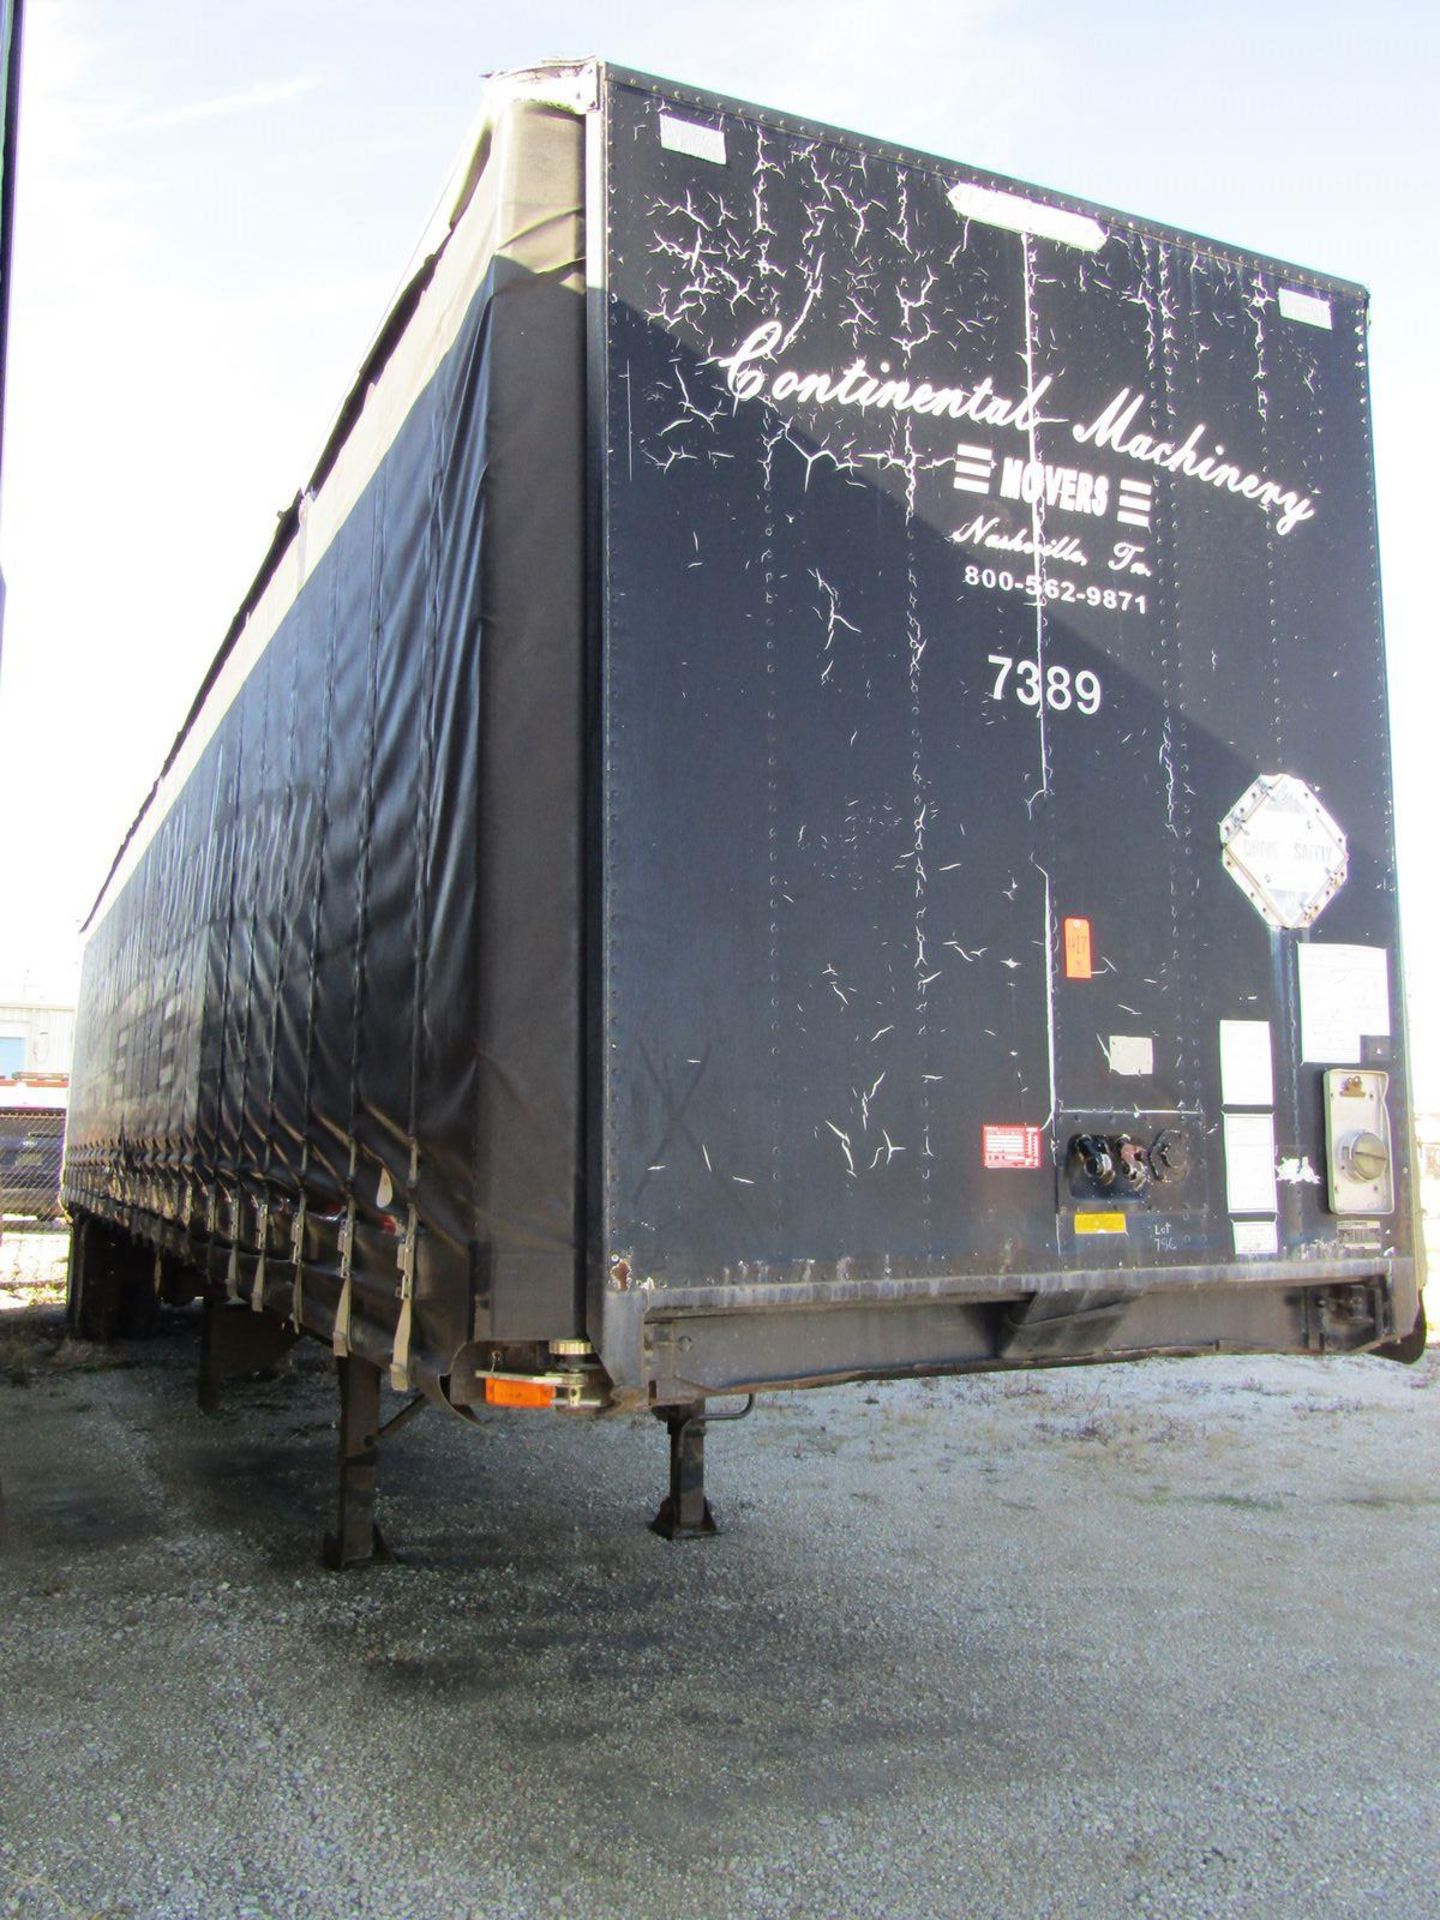 Utility 48 ft. Model TS2CHE Tautliner Tandem Axle Curtain Side Semi-Trailer, VIN: 1UYTS2488 MA5821 - Image 2 of 7